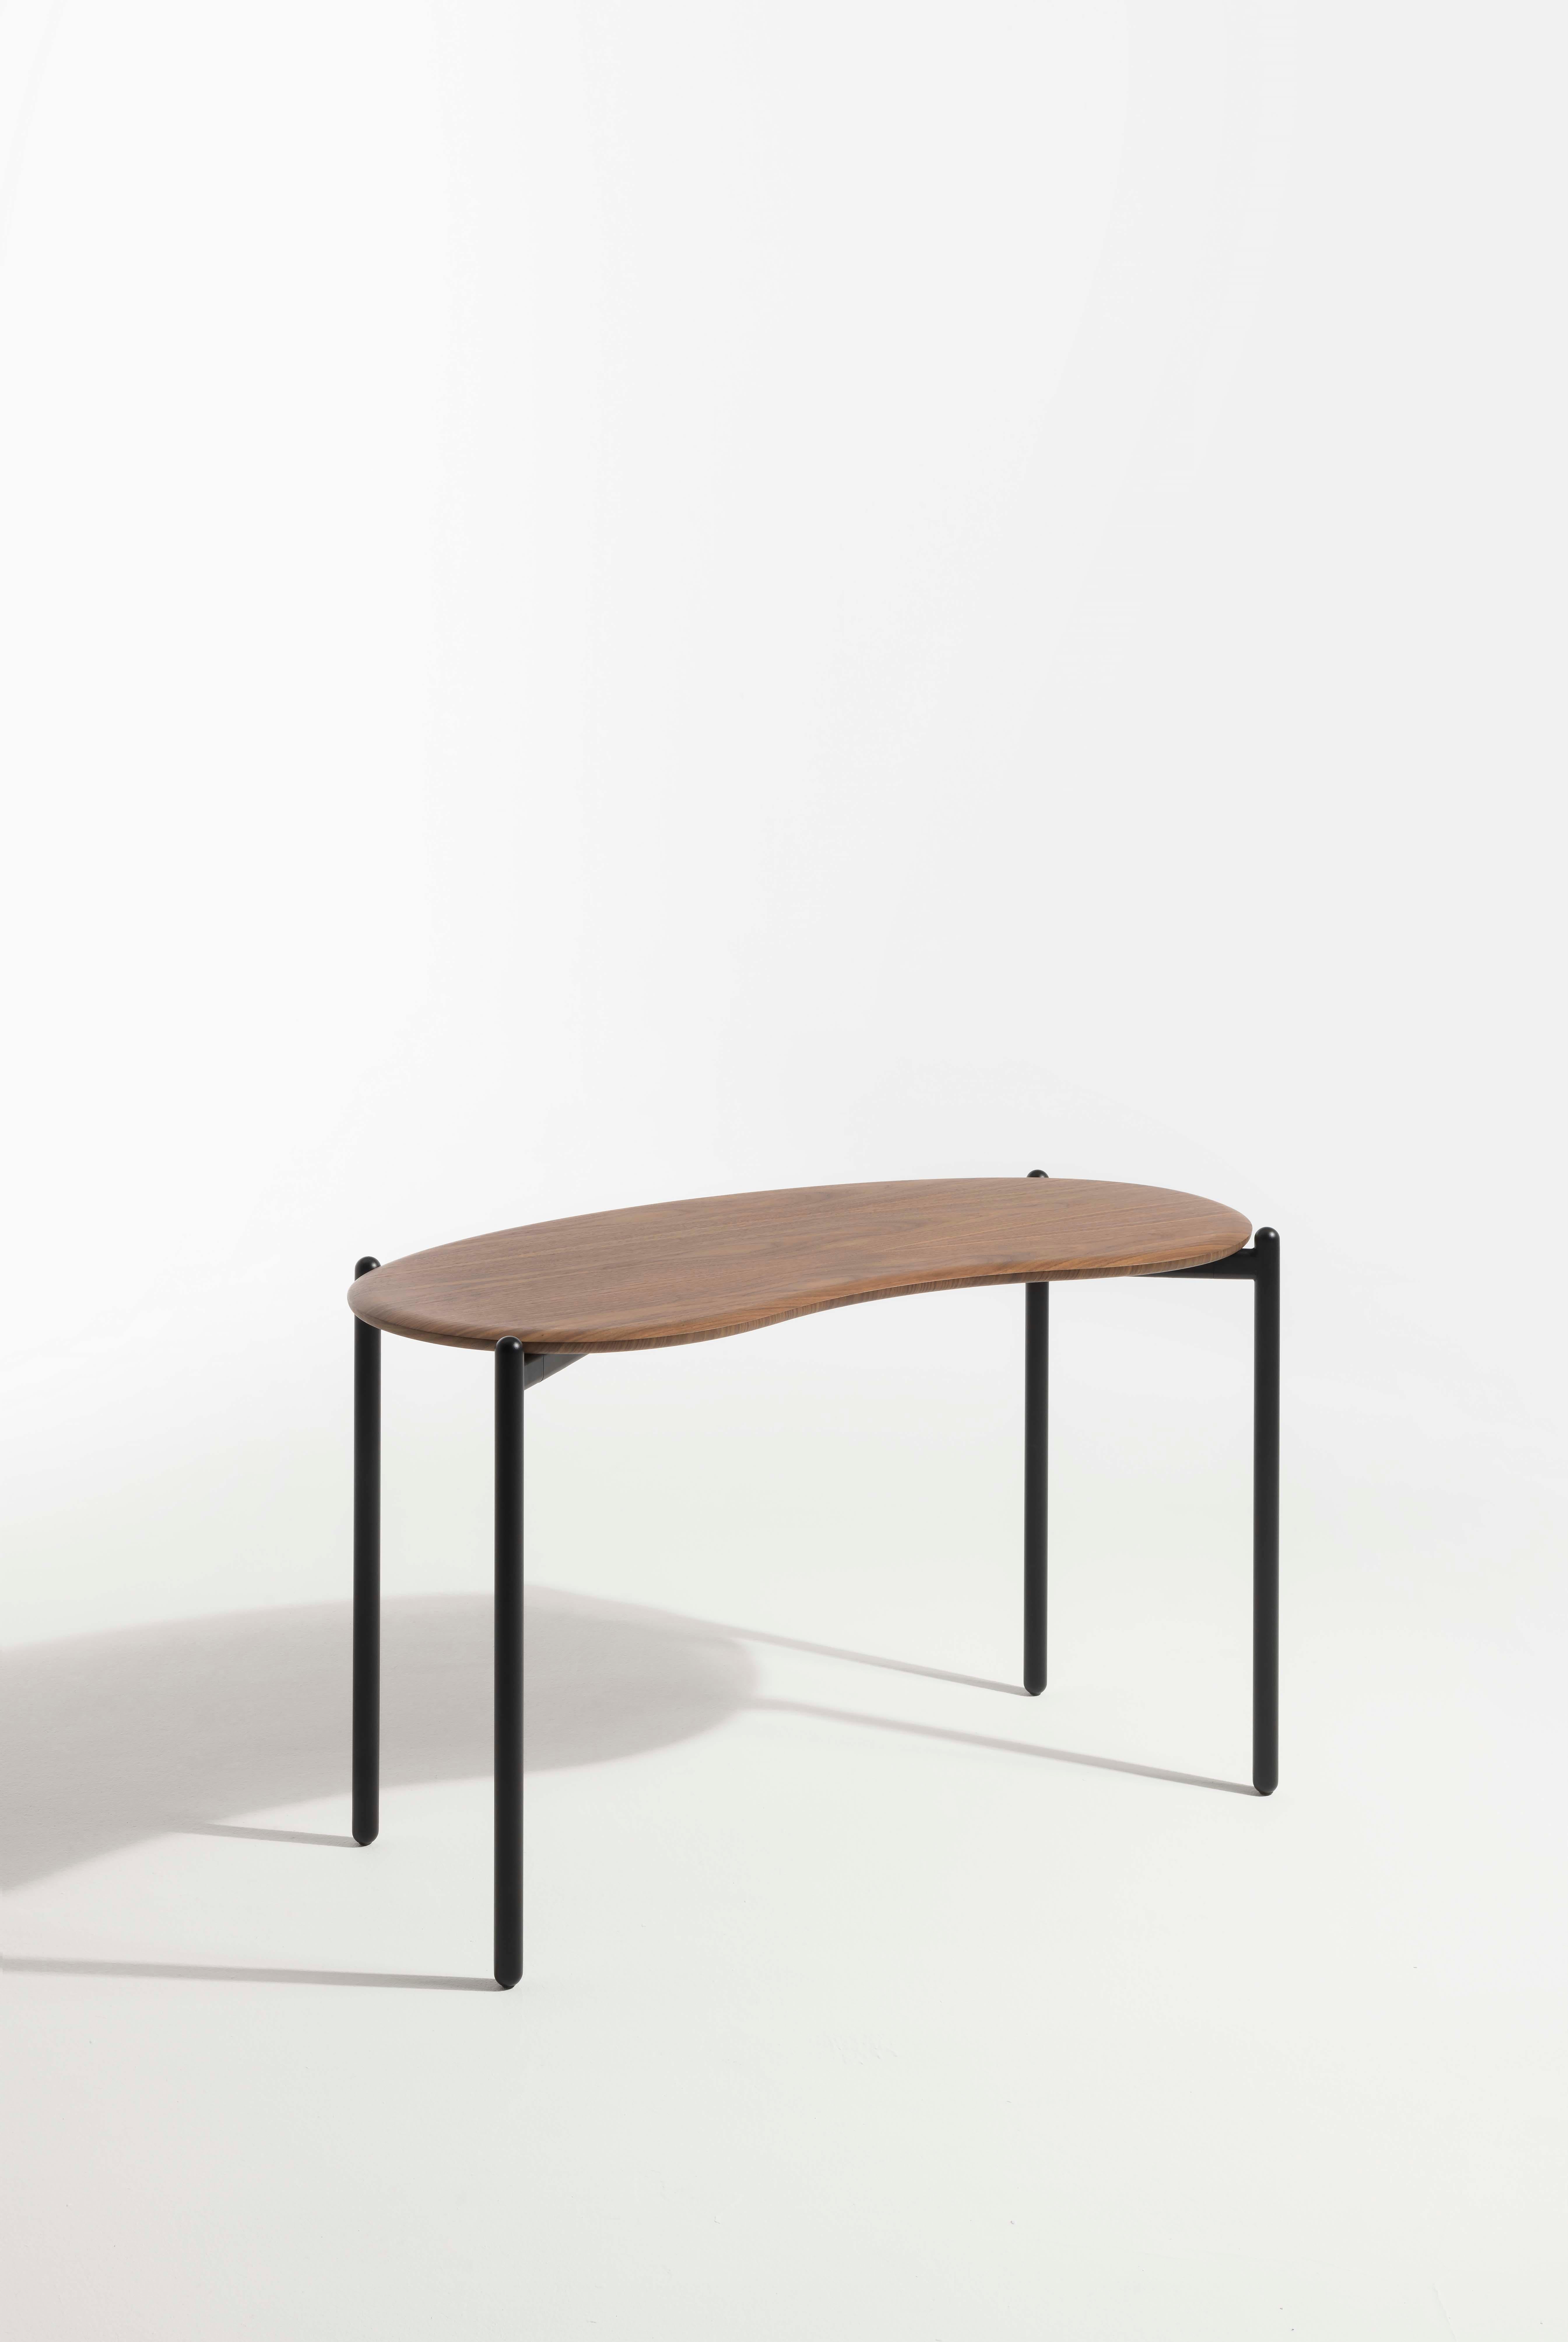 The LUNAT desk, designed by Patricia Urquiola, creates the ideal solution for a home smart working station as well as a desk in a hotel room. The powder-coated legs grow slender up to the bean-shaped top; the top is available in flamed walnut finish.